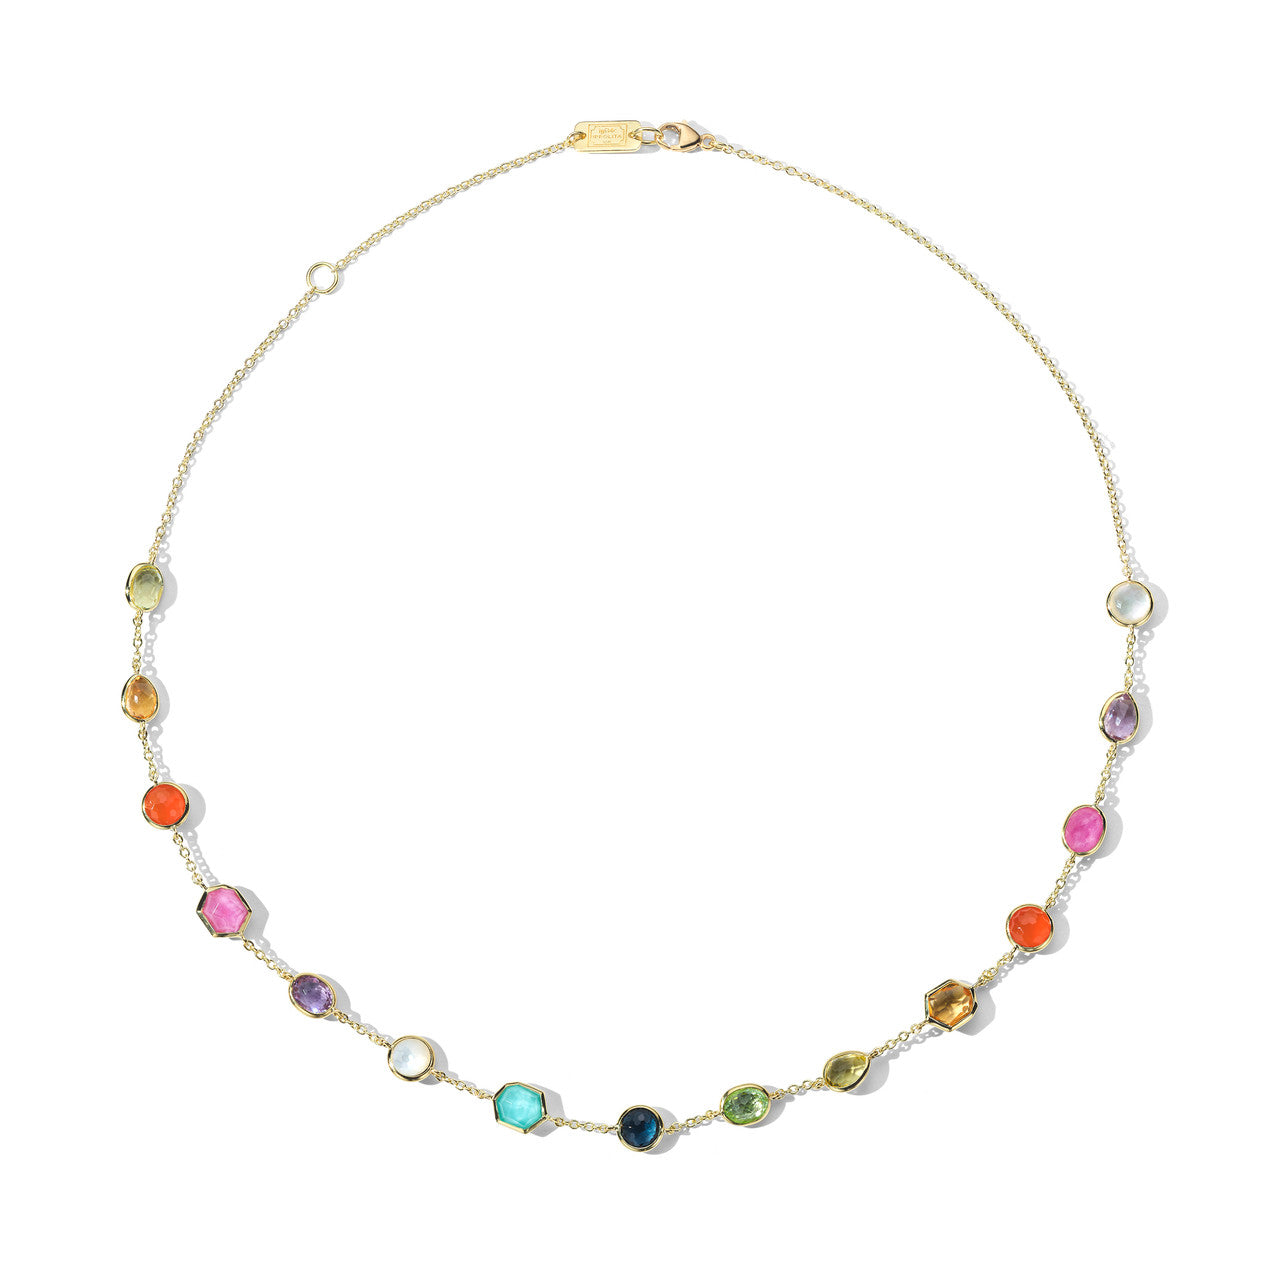 Rock Candy Necklace in Summer Rain